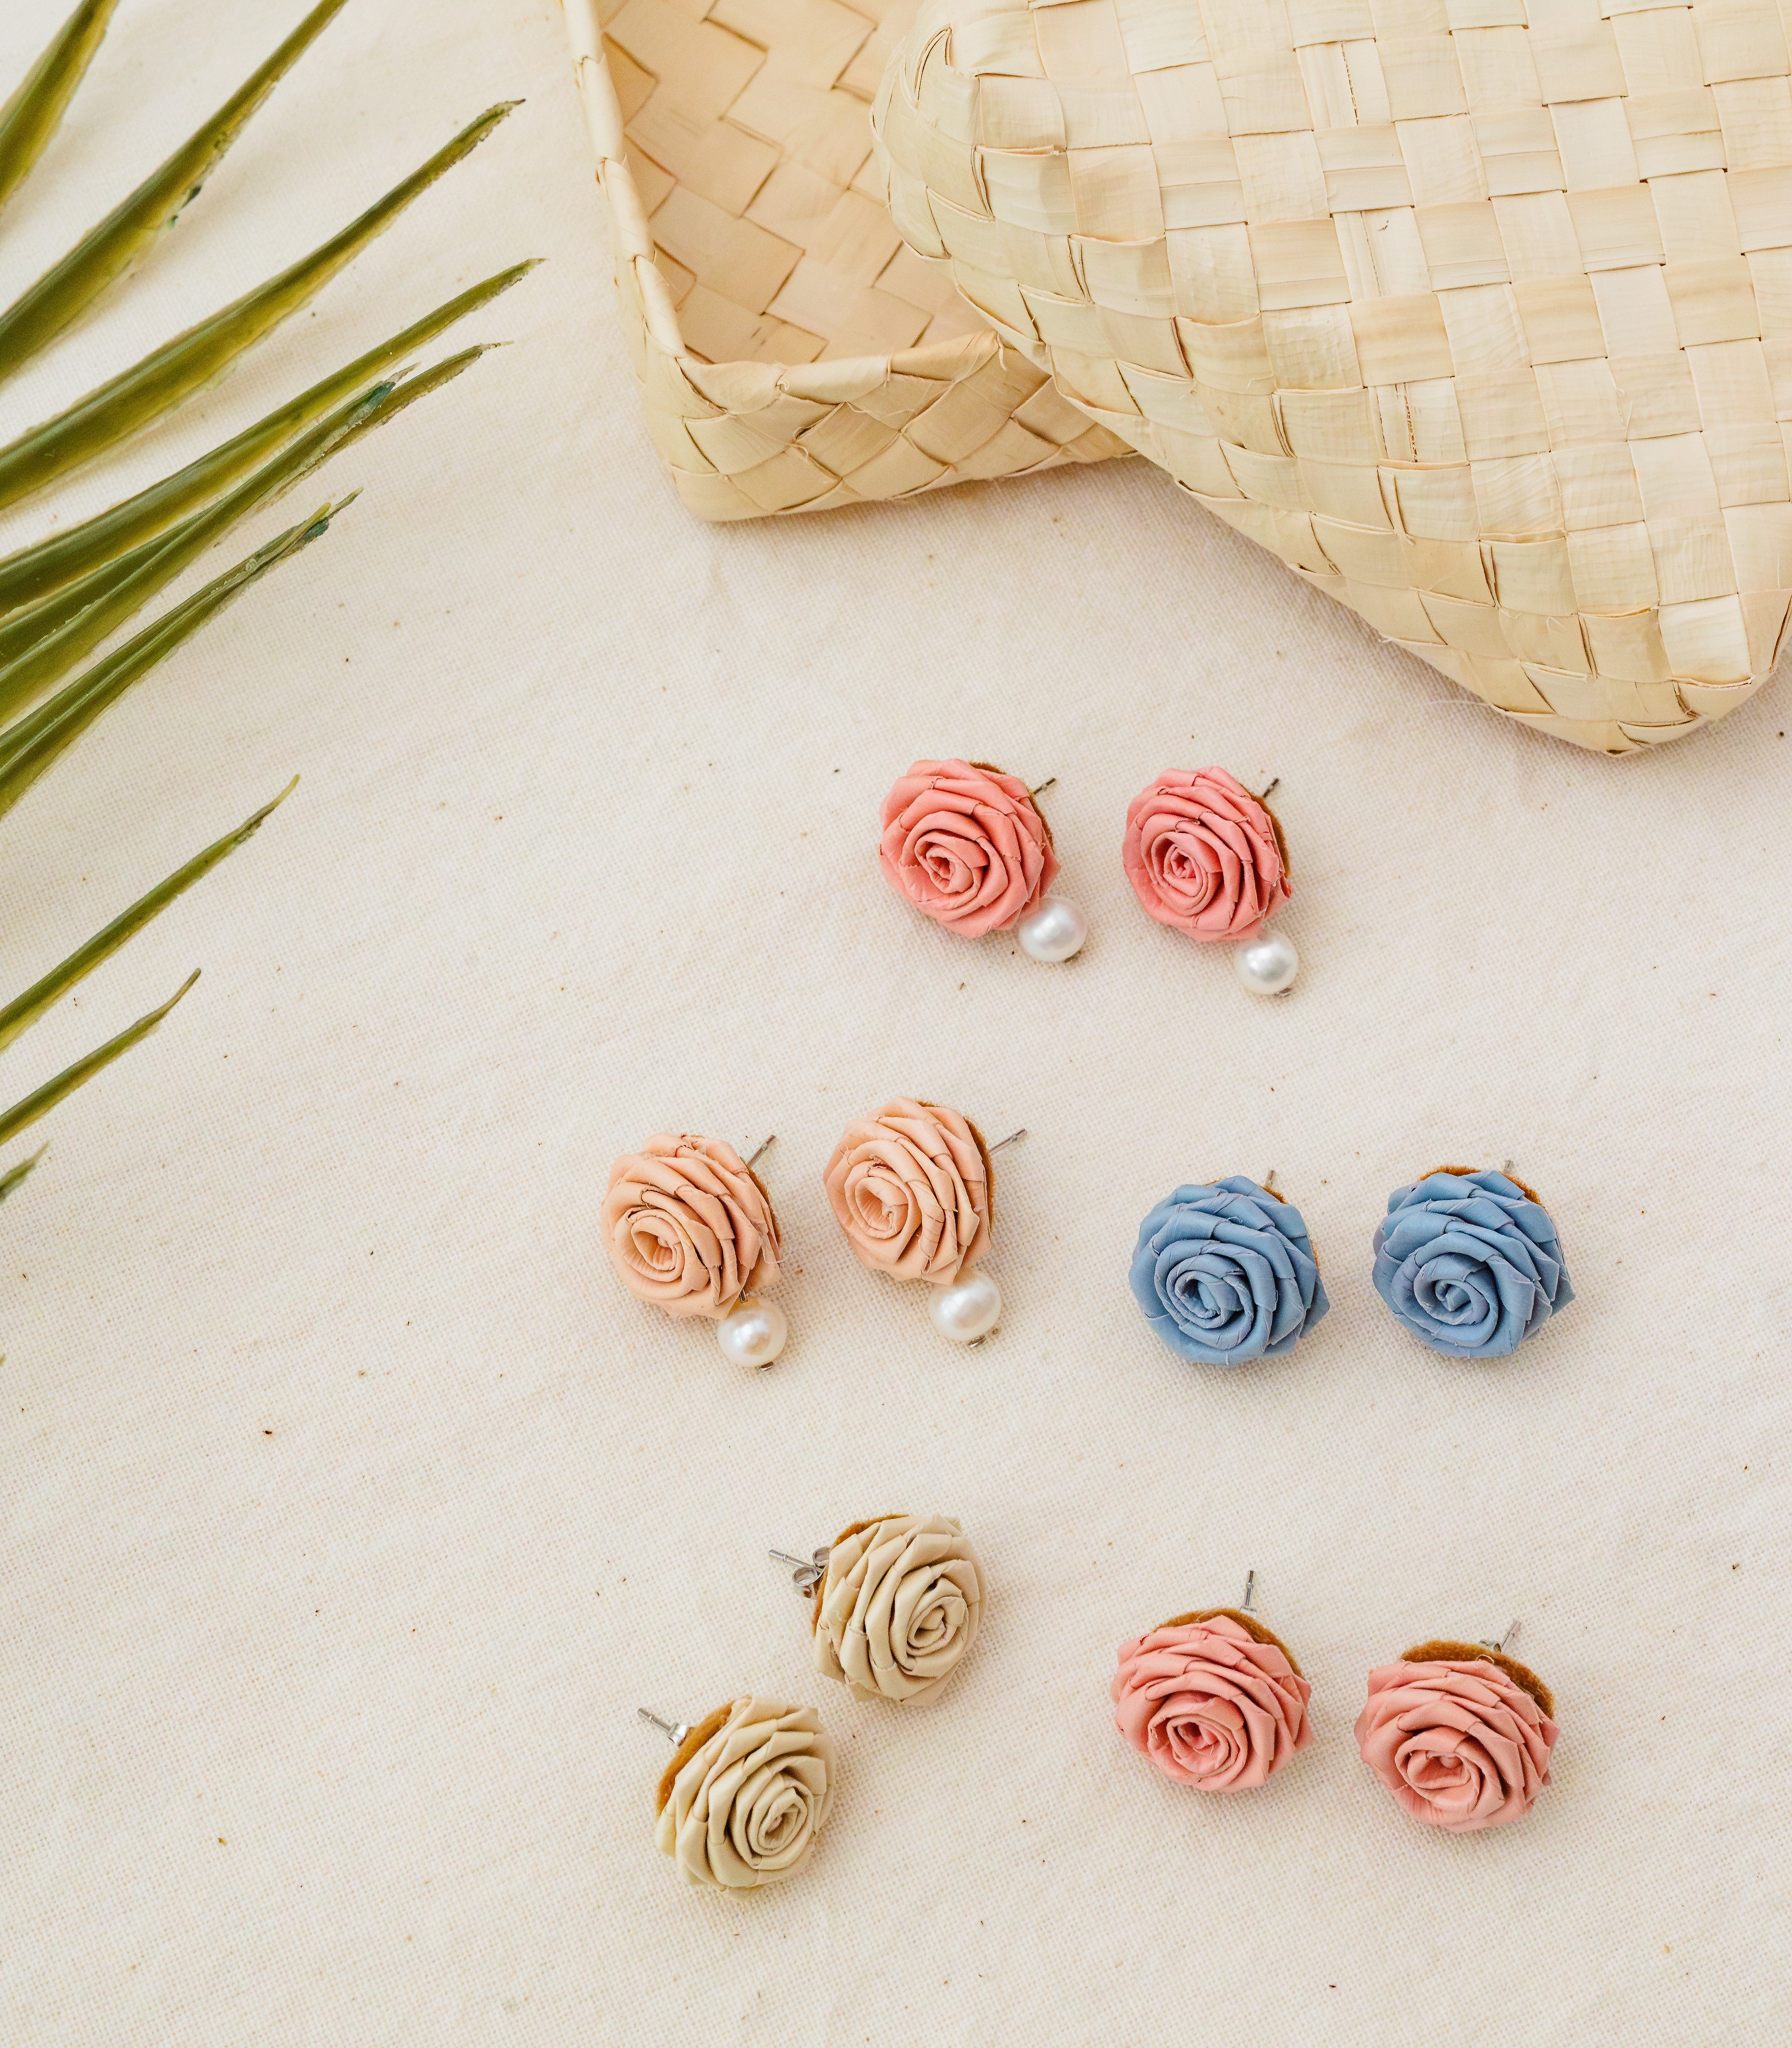 Handwoven Rosas Palm Leaf Earrings - Blush Pink, Dusty Blue and White - Punique